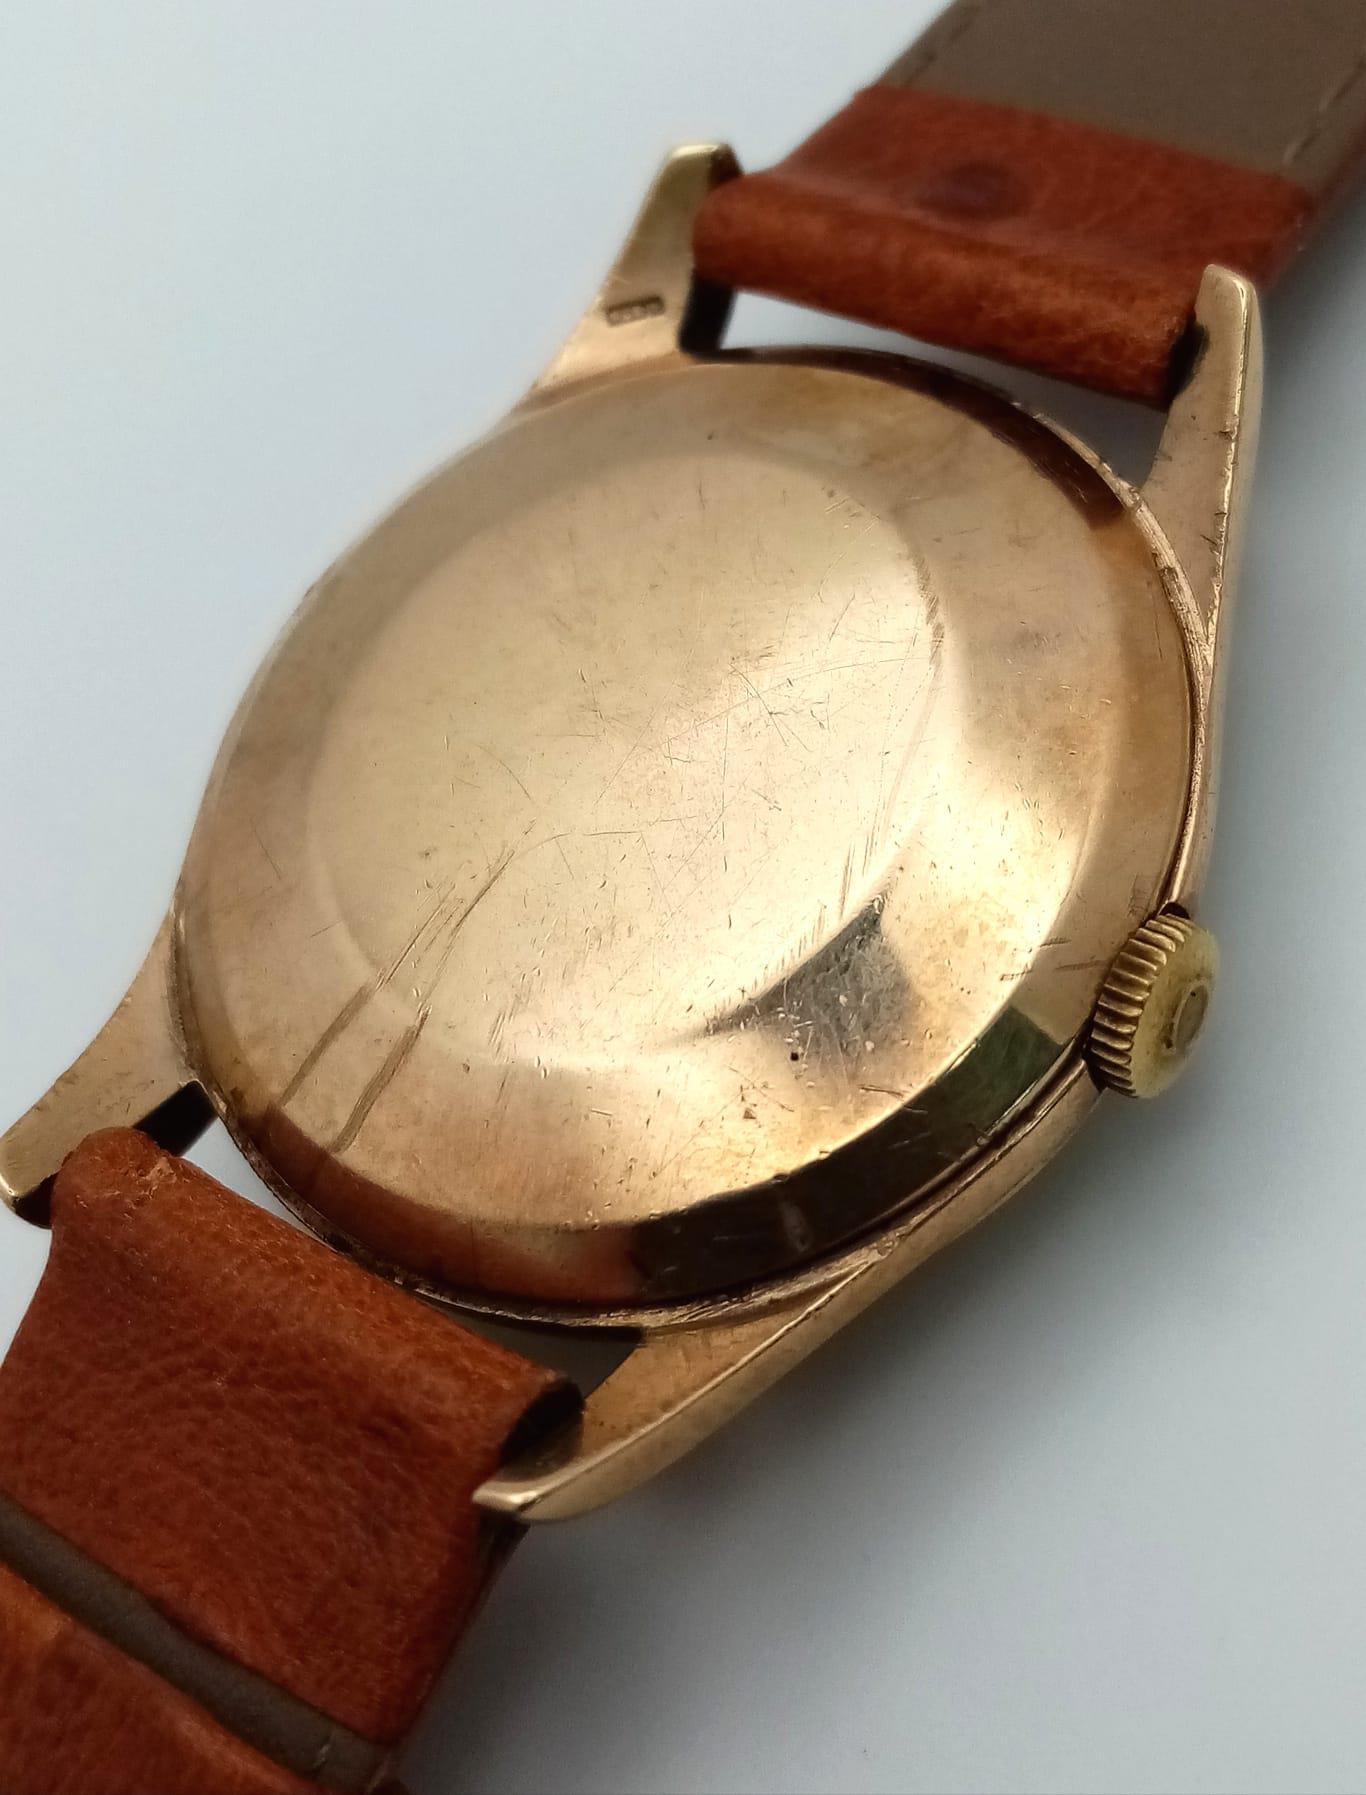 A 9K YELLOW GOLD CASED OMEGA WATCH ON TAN LEATHER STRAP. FULL WORKING ORDER ref: MB 5001 - Image 6 of 7